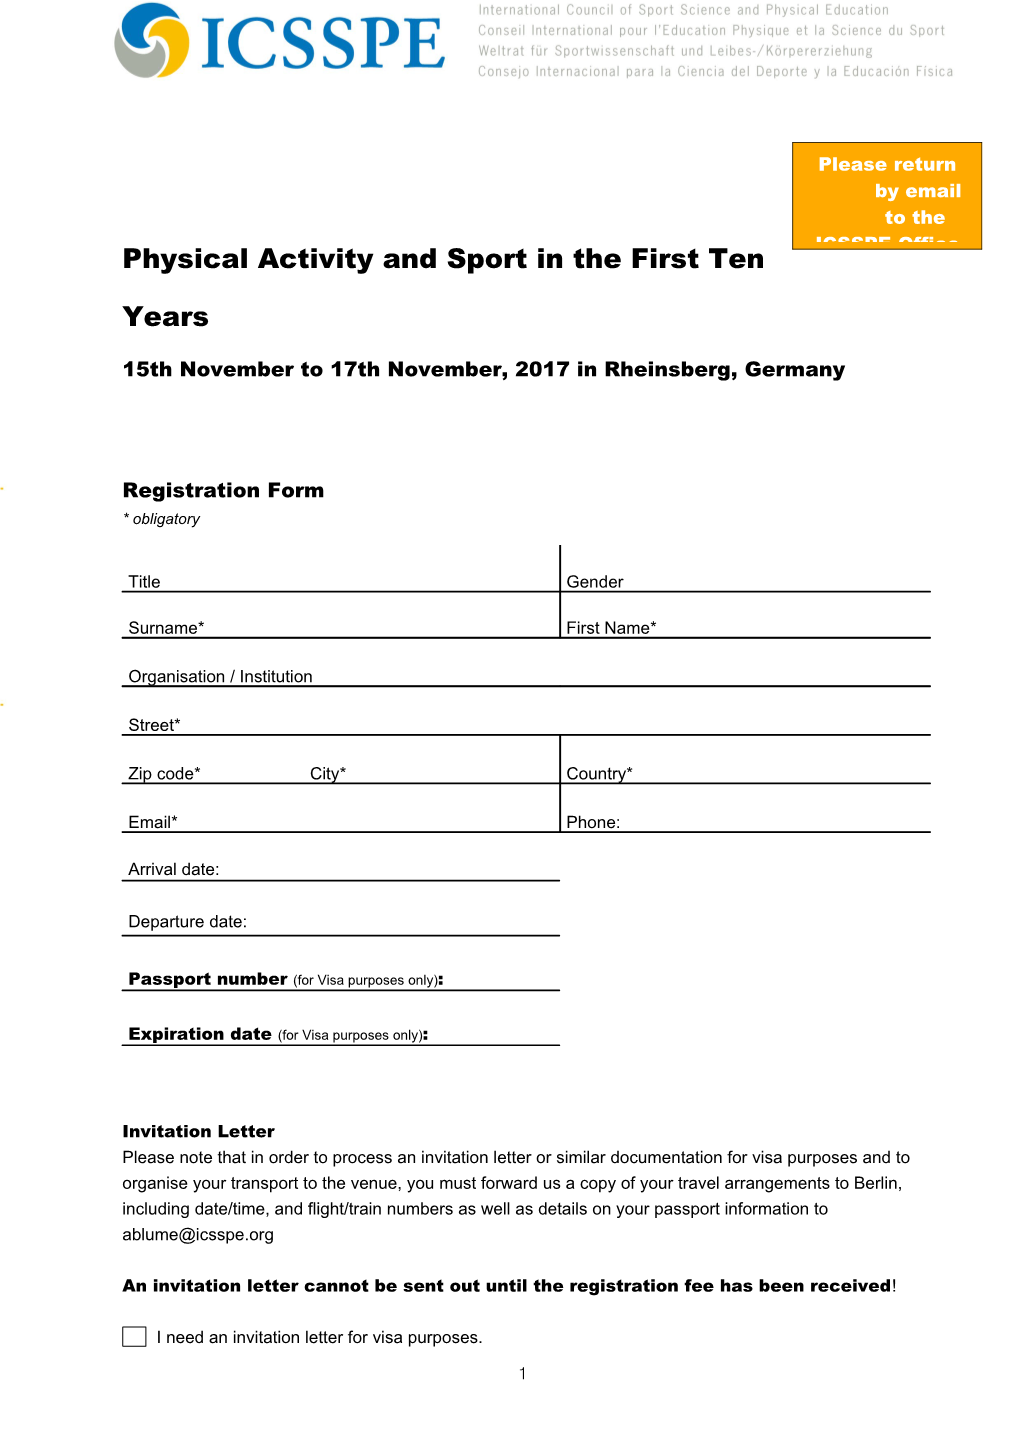 Physical Activity and Sport in the First Ten Years